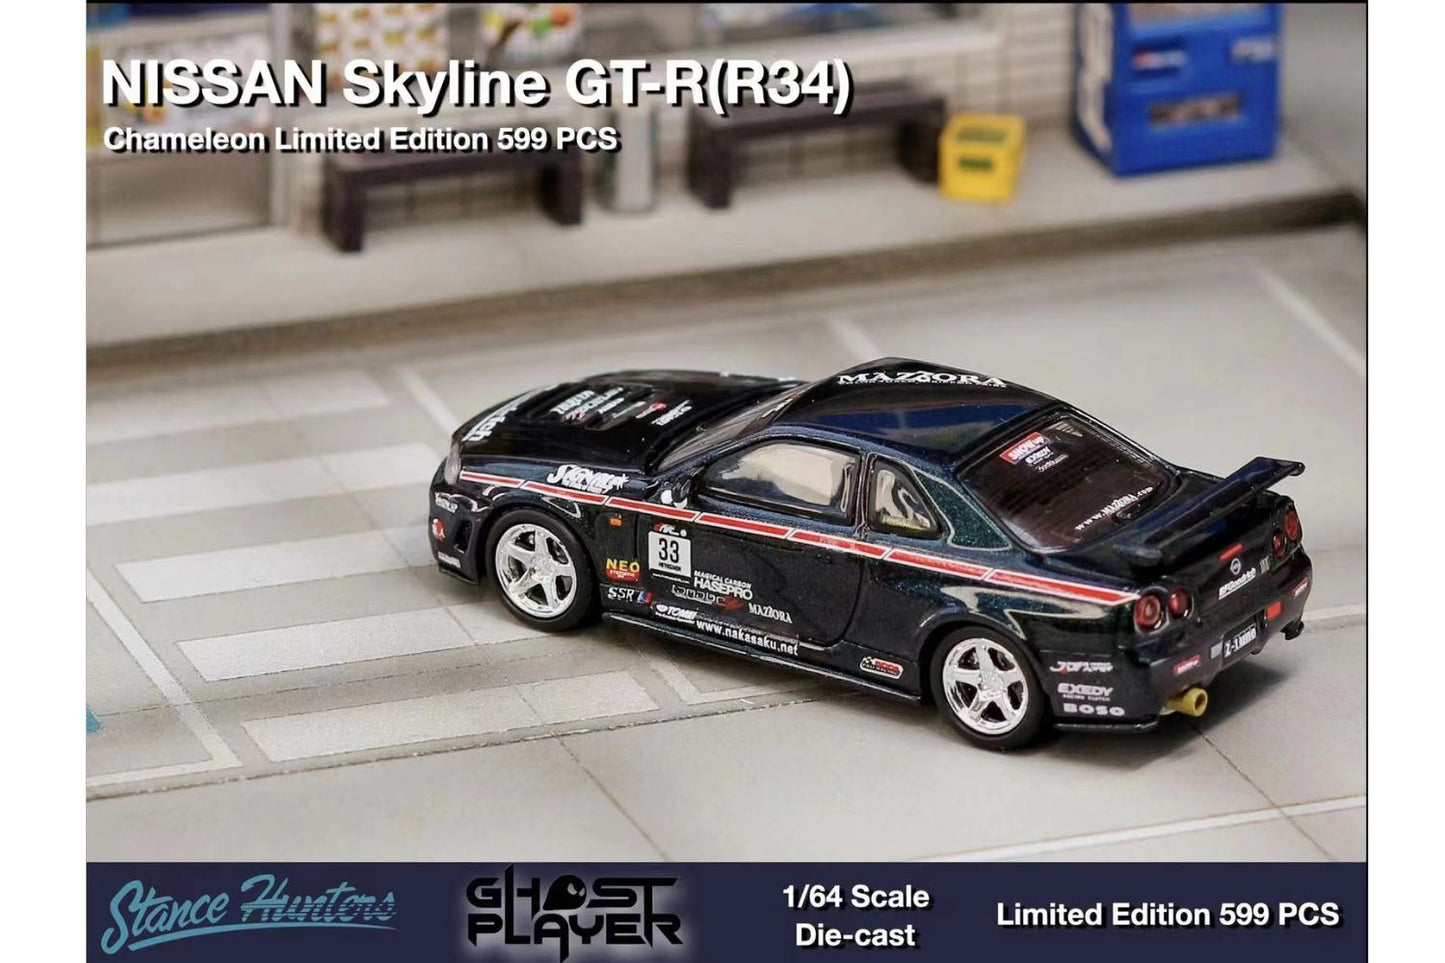 Stance Hunters x Ghost Player 1/64 Nissan Skyline GT-R (R34) in Chameleon